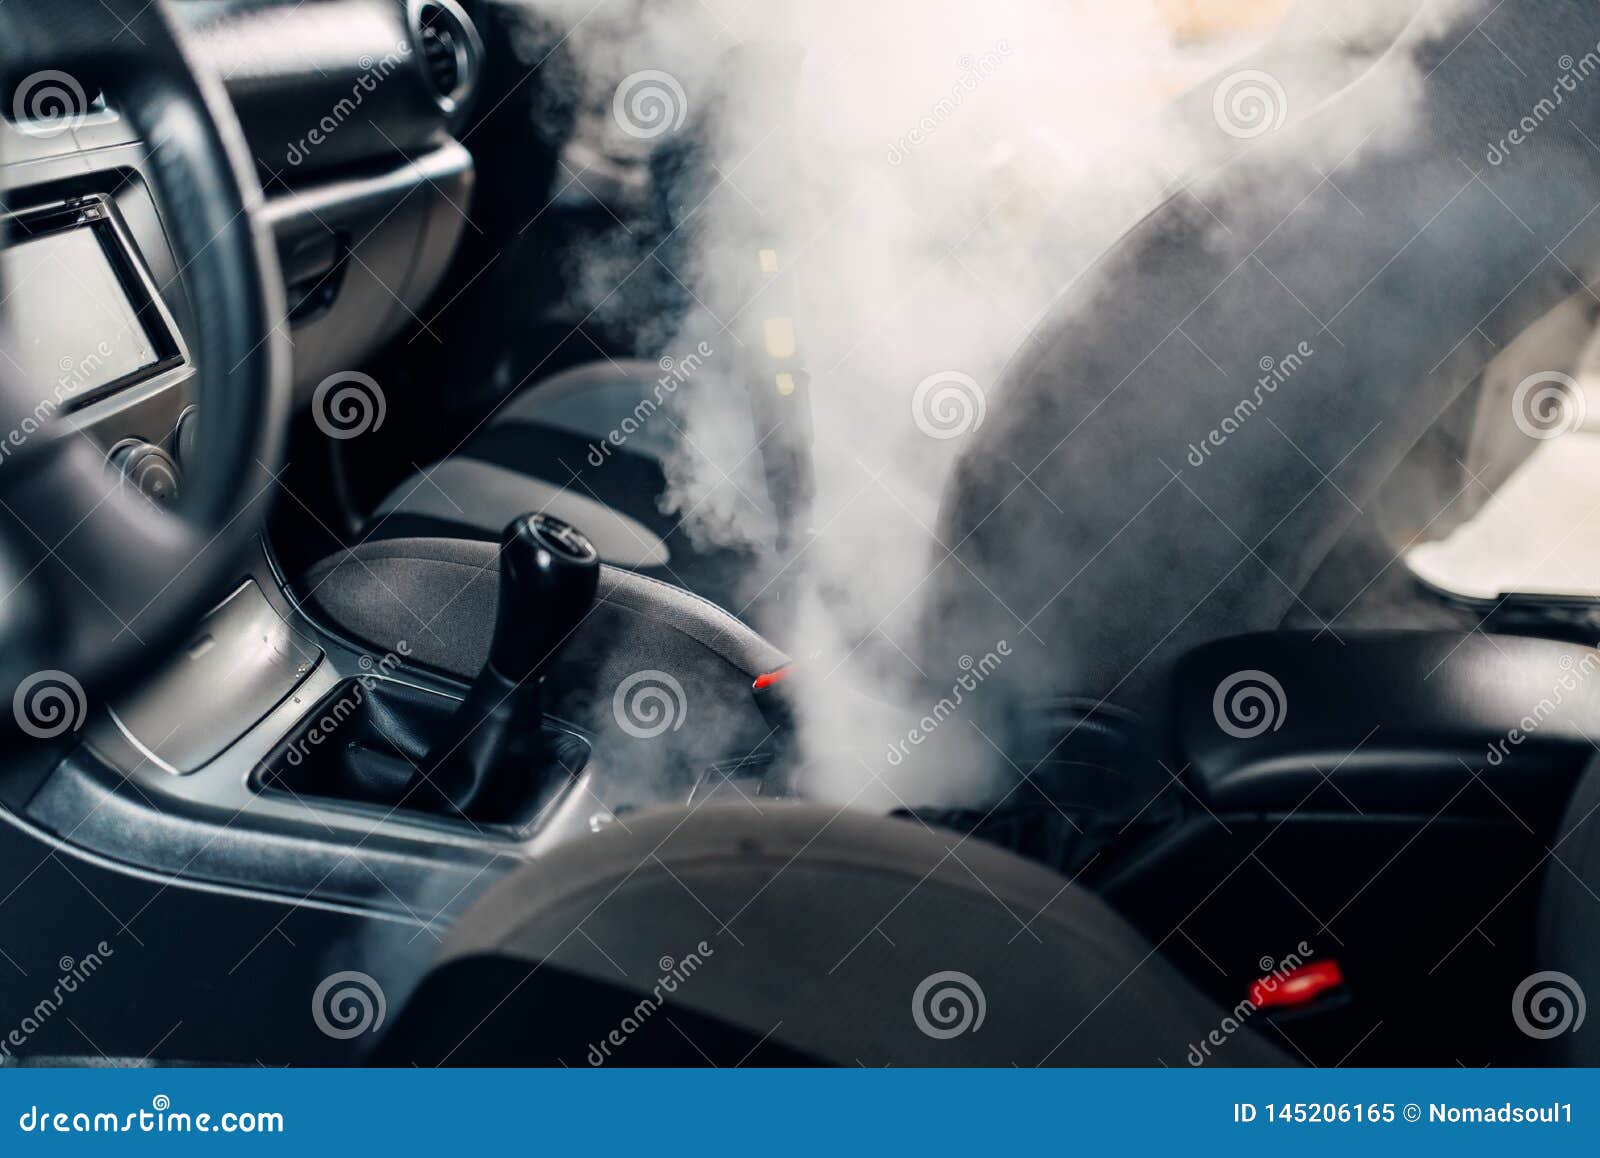 Dry Cleaning Of Car Interior With Steam Cleaner Stock Image